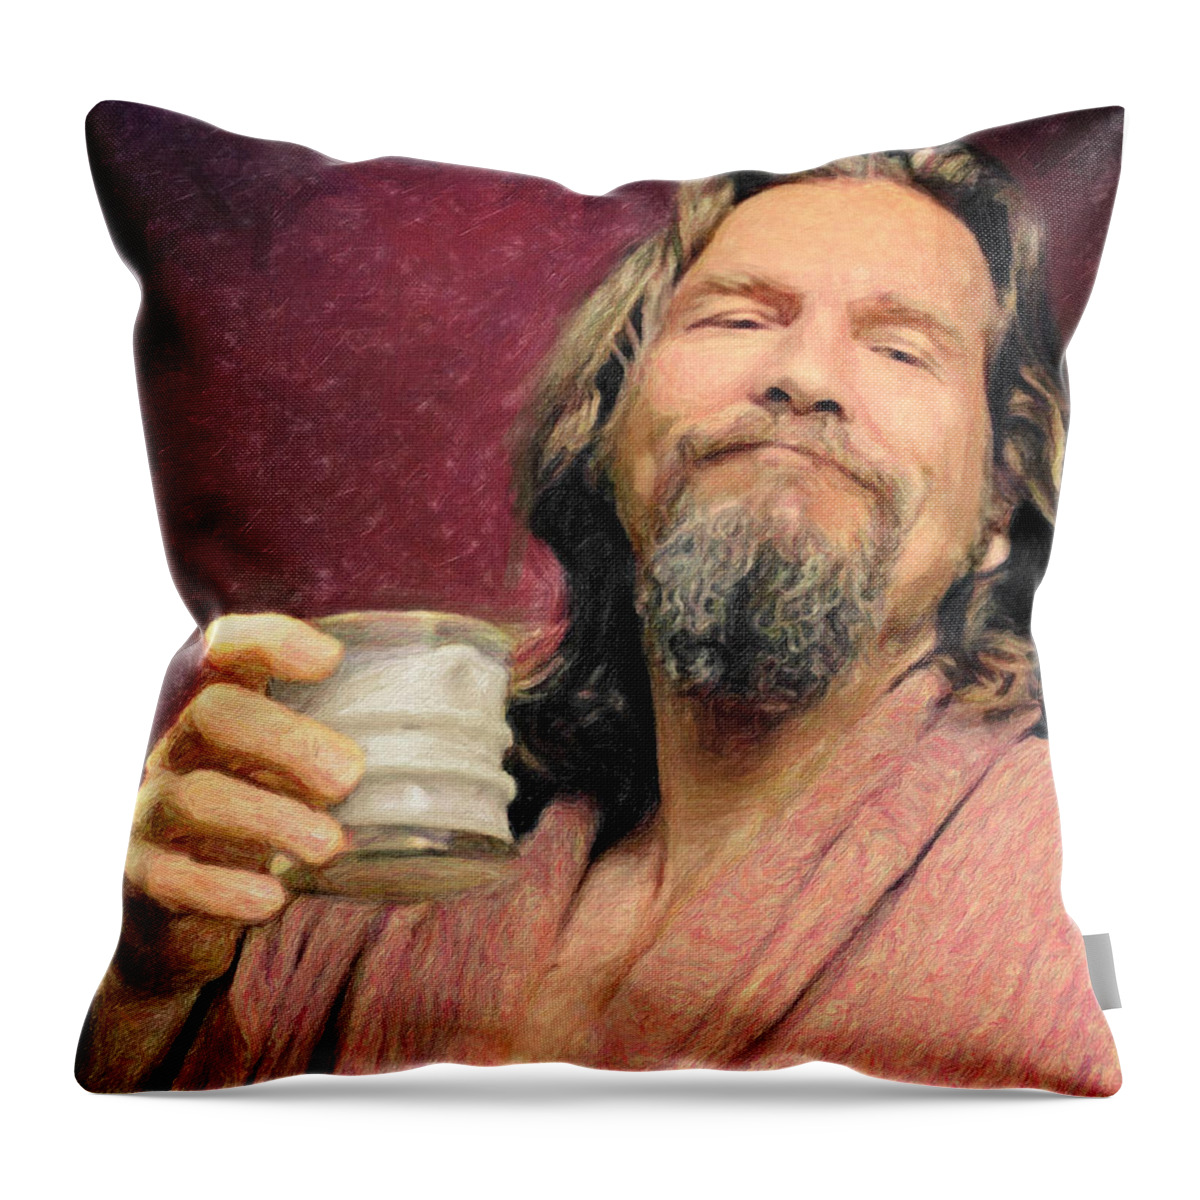 The Dude Throw Pillow featuring the painting The Dude by Zapista OU